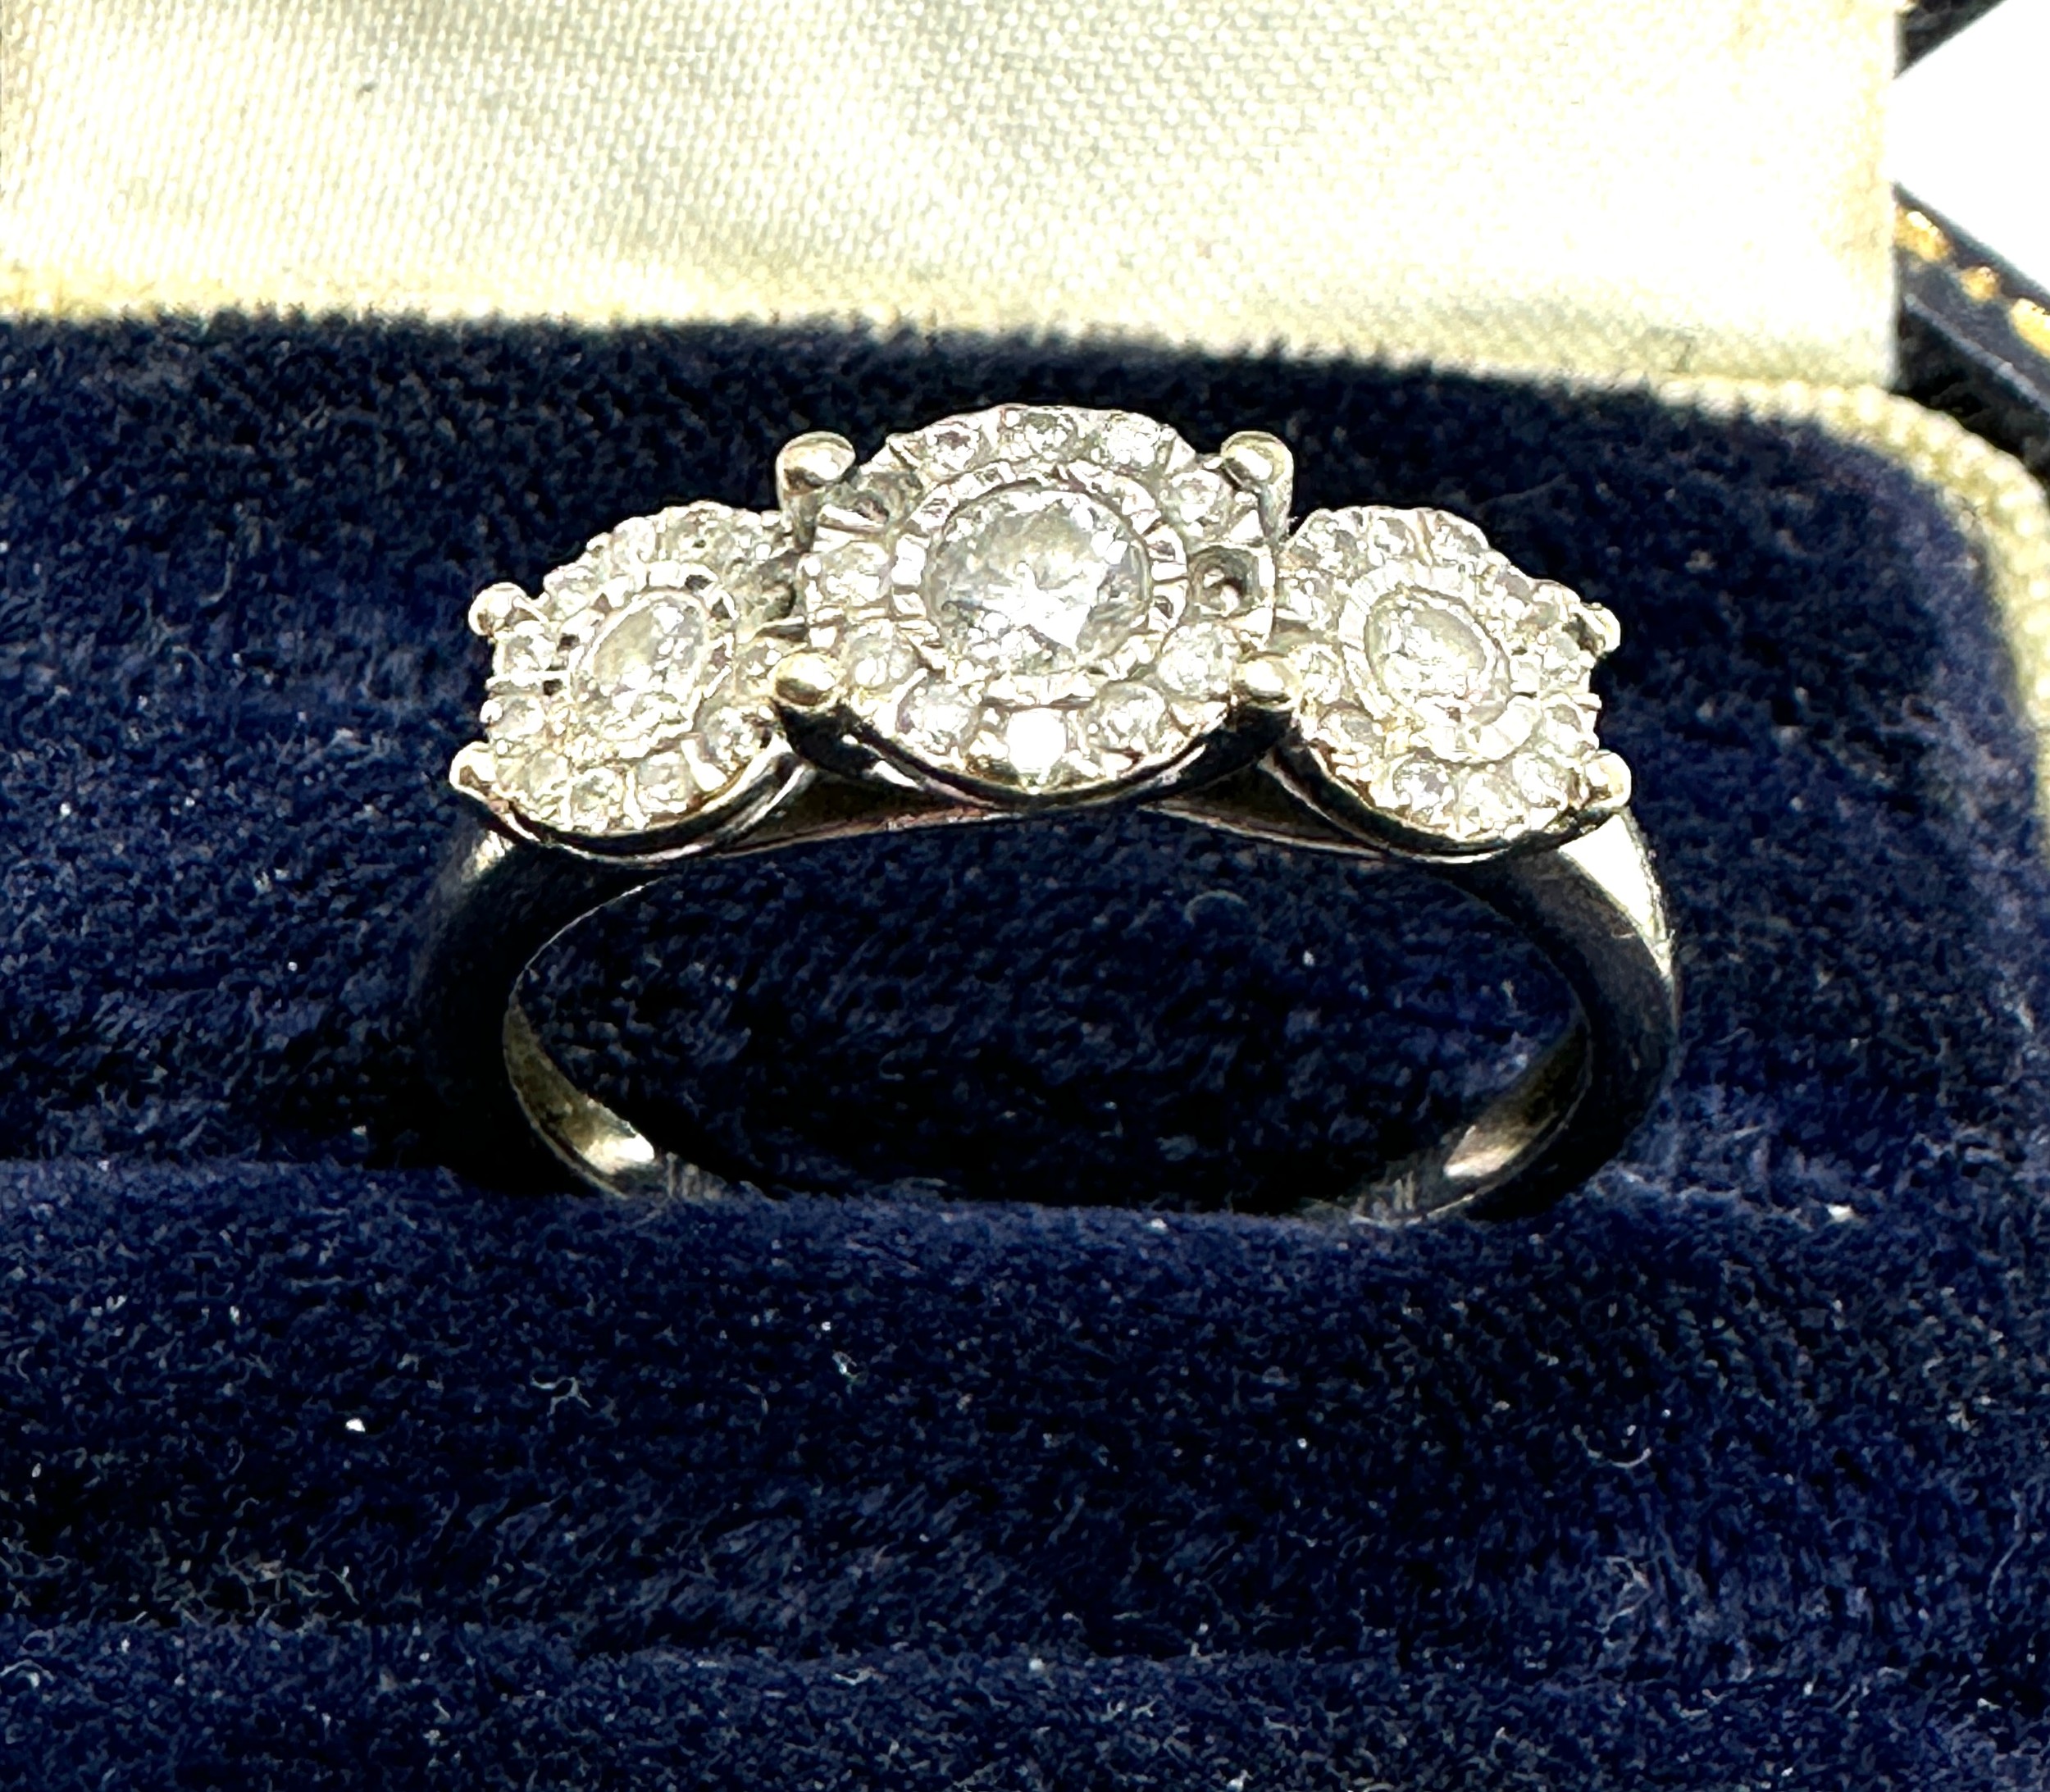 10ct gold diamond cluster ring (as seen) (2.4g) missing stone